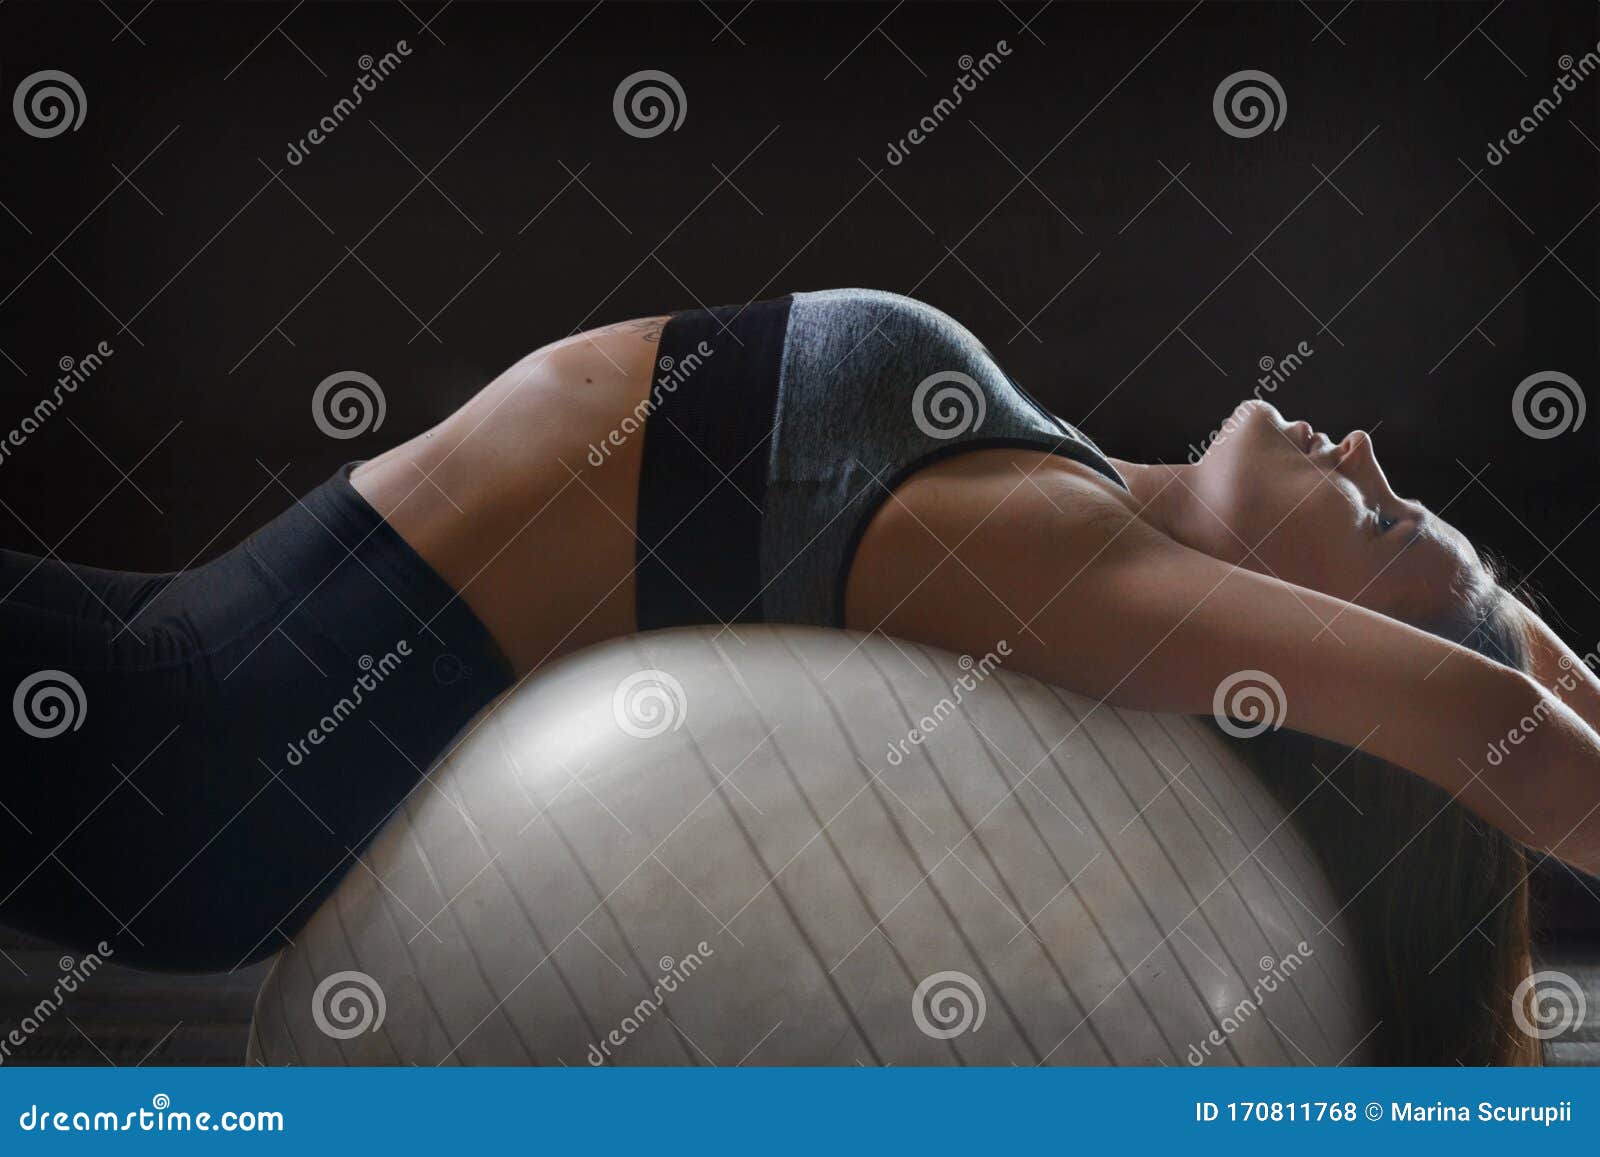 woman exercising her abs on a pilates fit ball